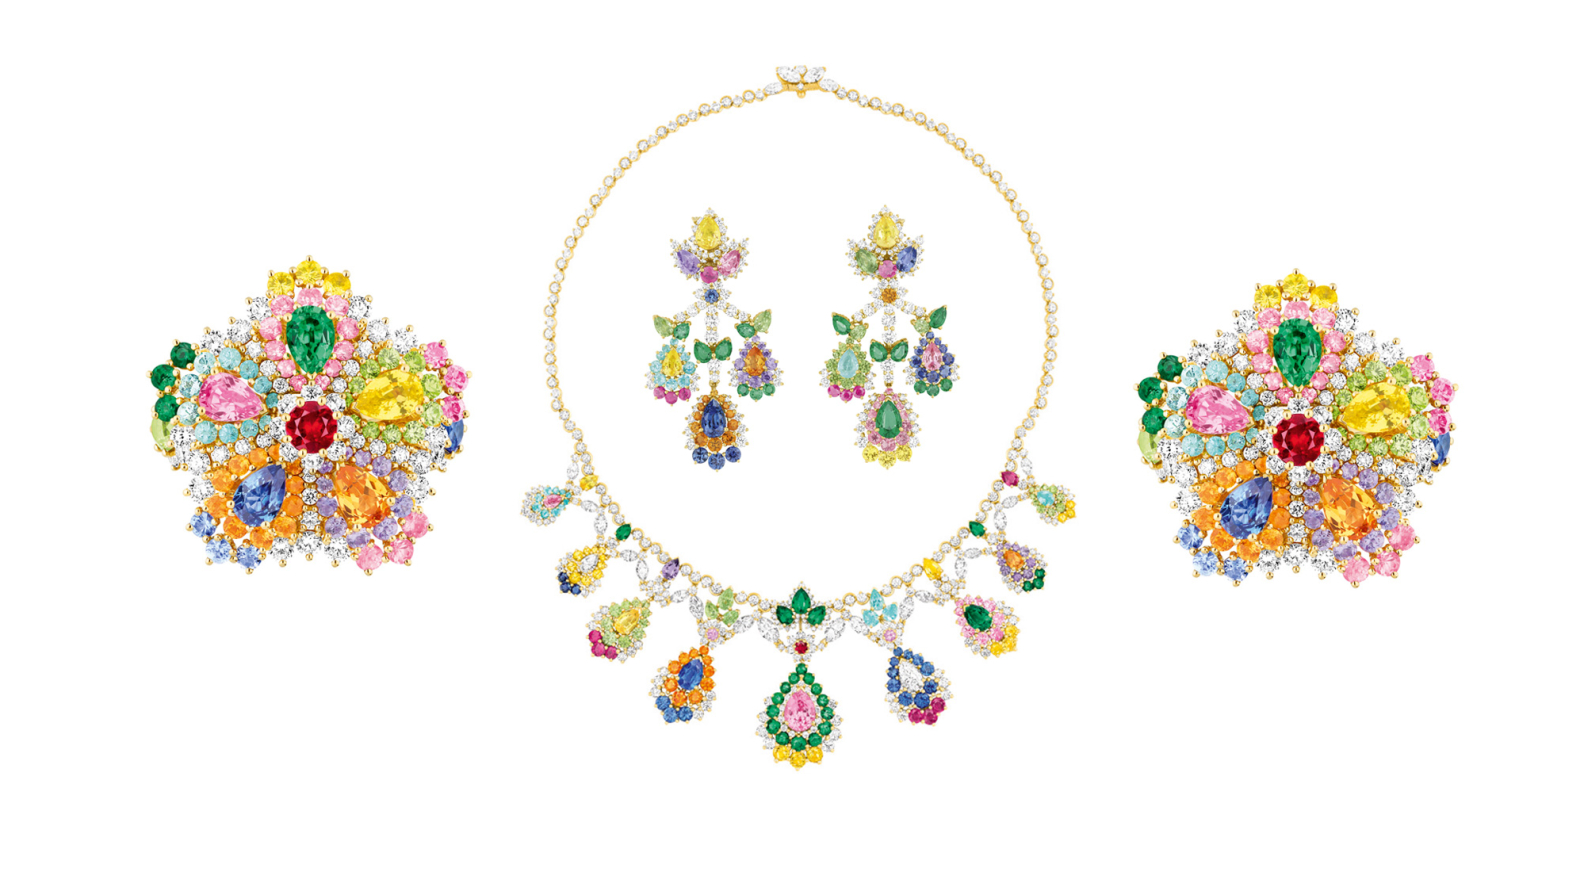 Chaumet, Dior Joaillerie, Louis Vuitton and Bulgari unveil new high jewelry  collections - LVMH